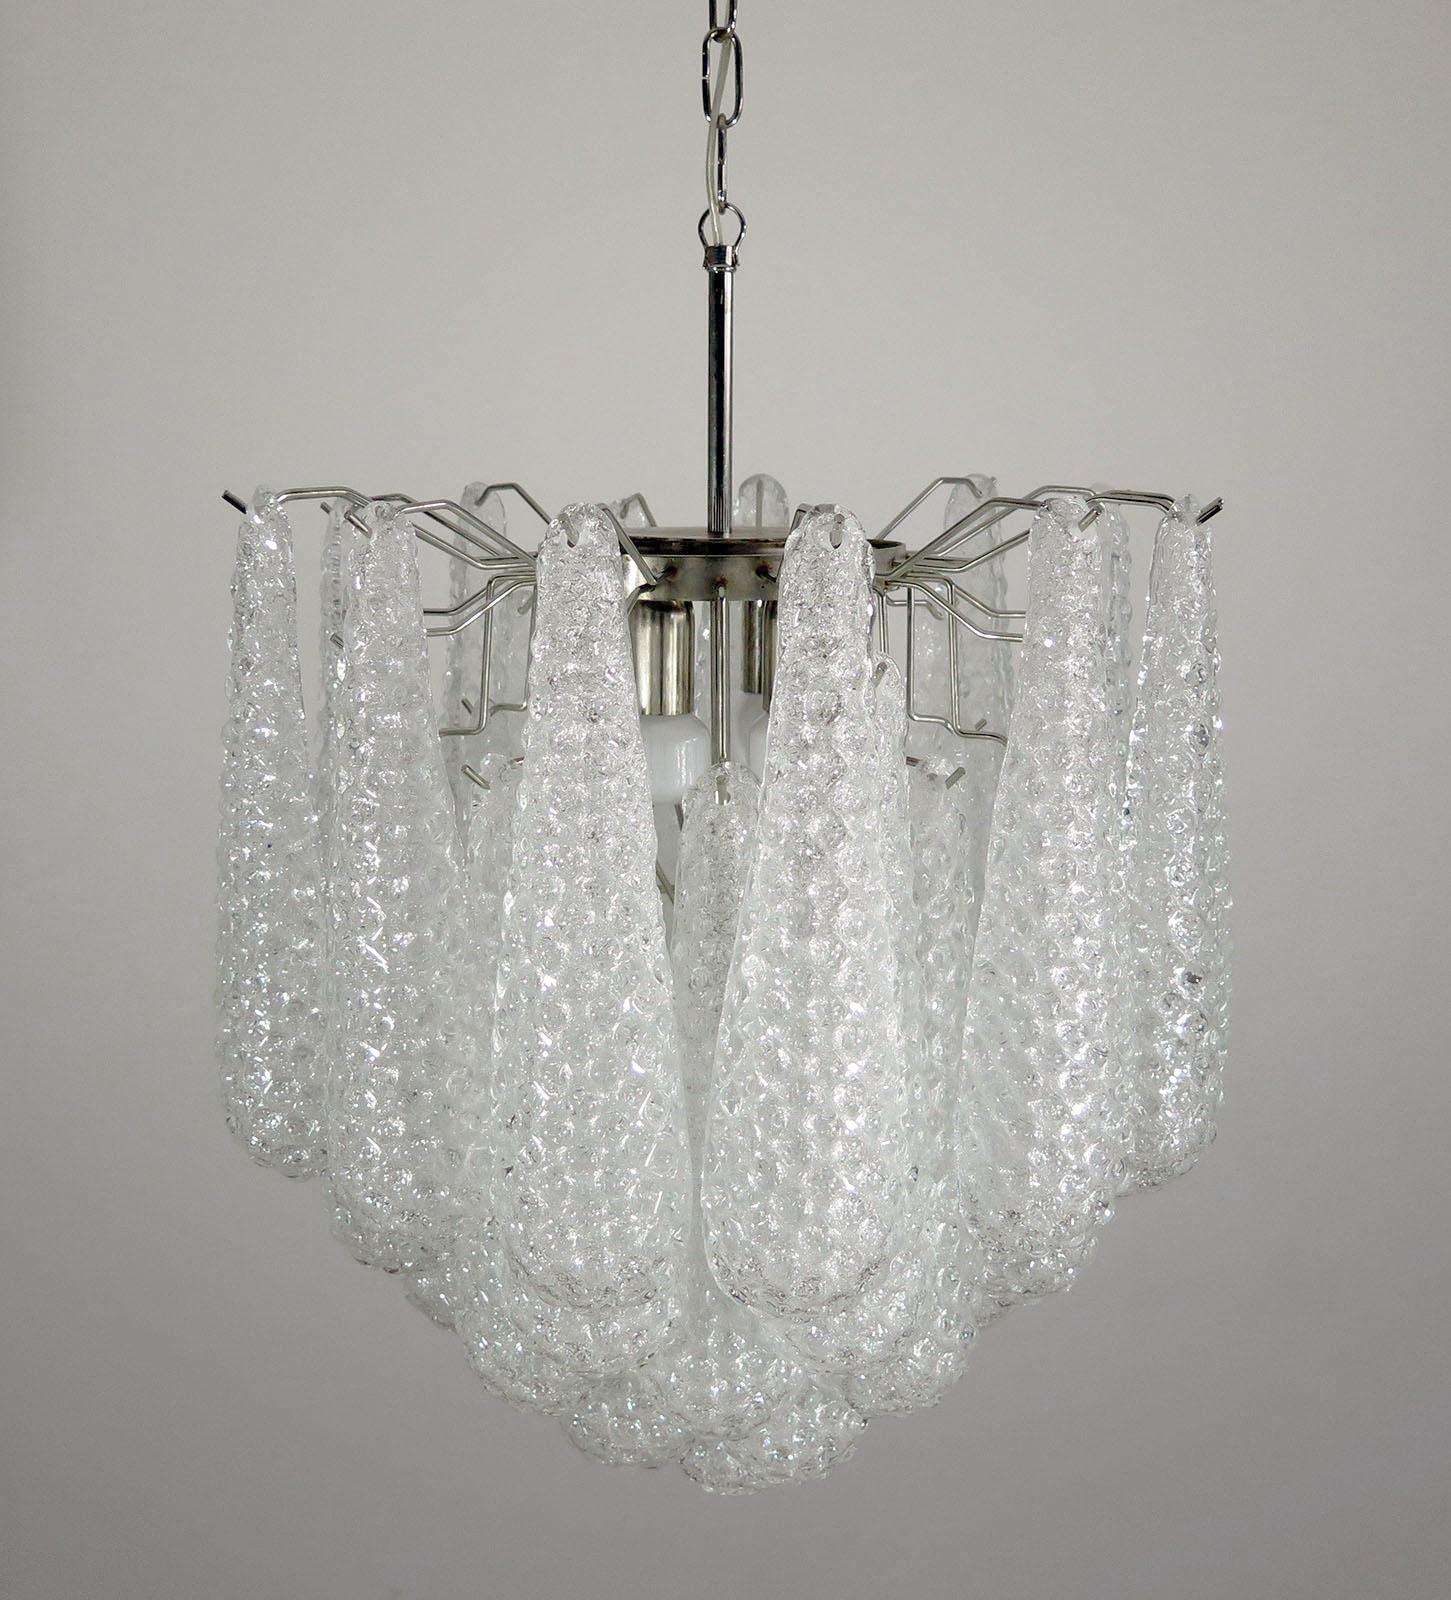 Italian vintage Murano chandelier made by 41 glass petals (transparent crystal, smooth outside, with crystal powder and then rough inside.) in a chrome frame.
Period: 1970’s / 1980's
Dimensions: 49,20 inches (125 cm) height with chain; 25,80